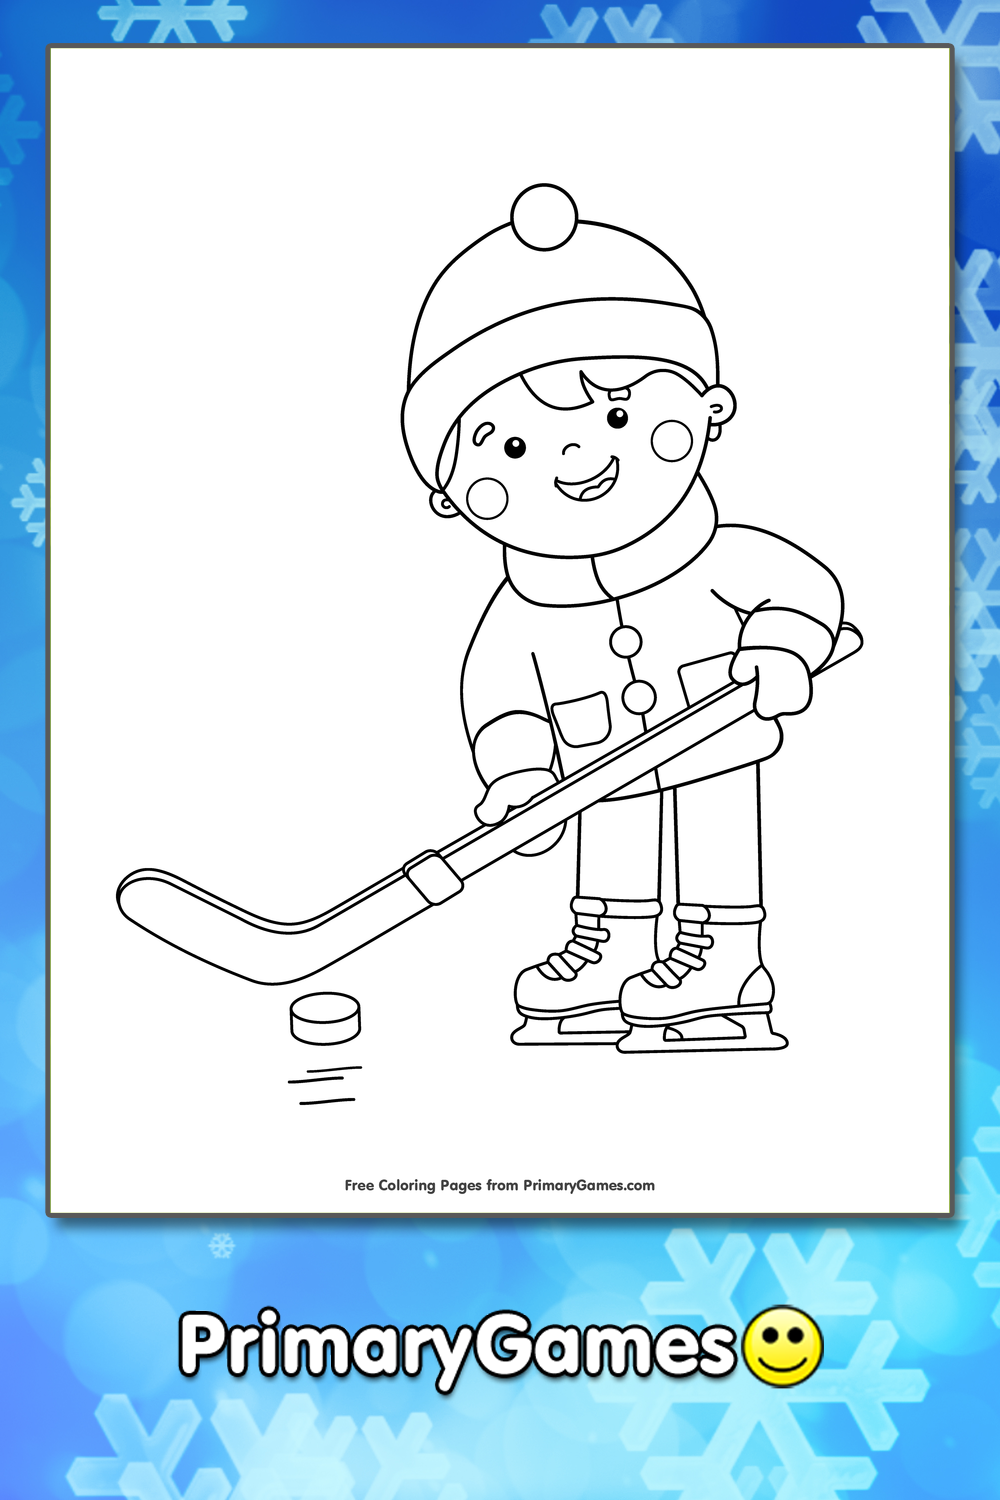 Hockey Coloring Books for Boys Ages 8-12: Fun Ice Hockey Sports Coloring  Book for Kids (Paperback)